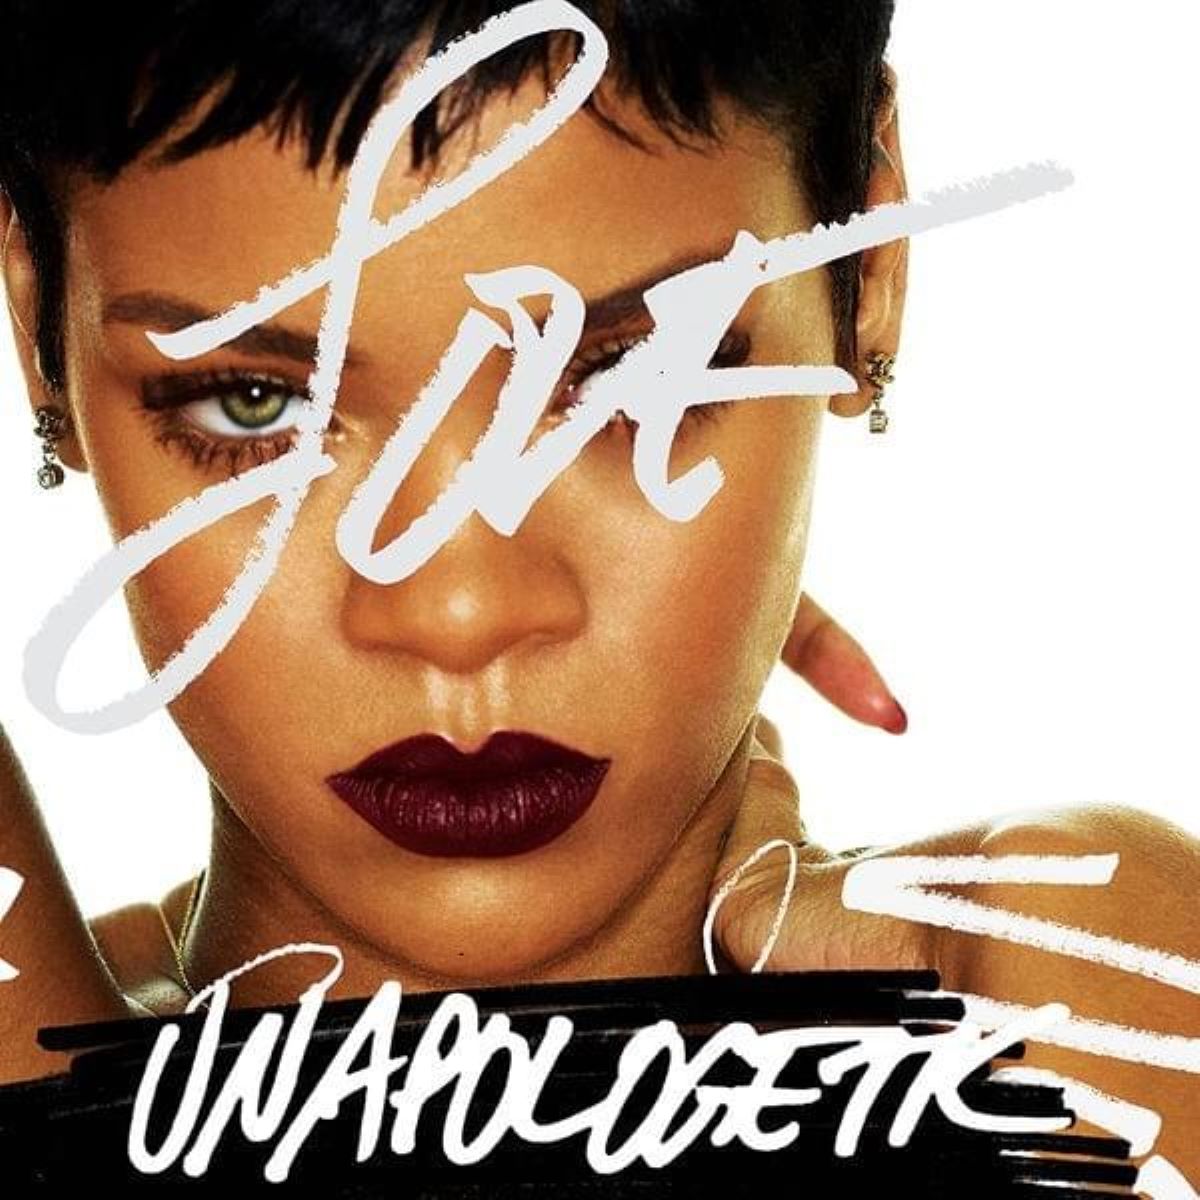 07. Unapologetic (2012)